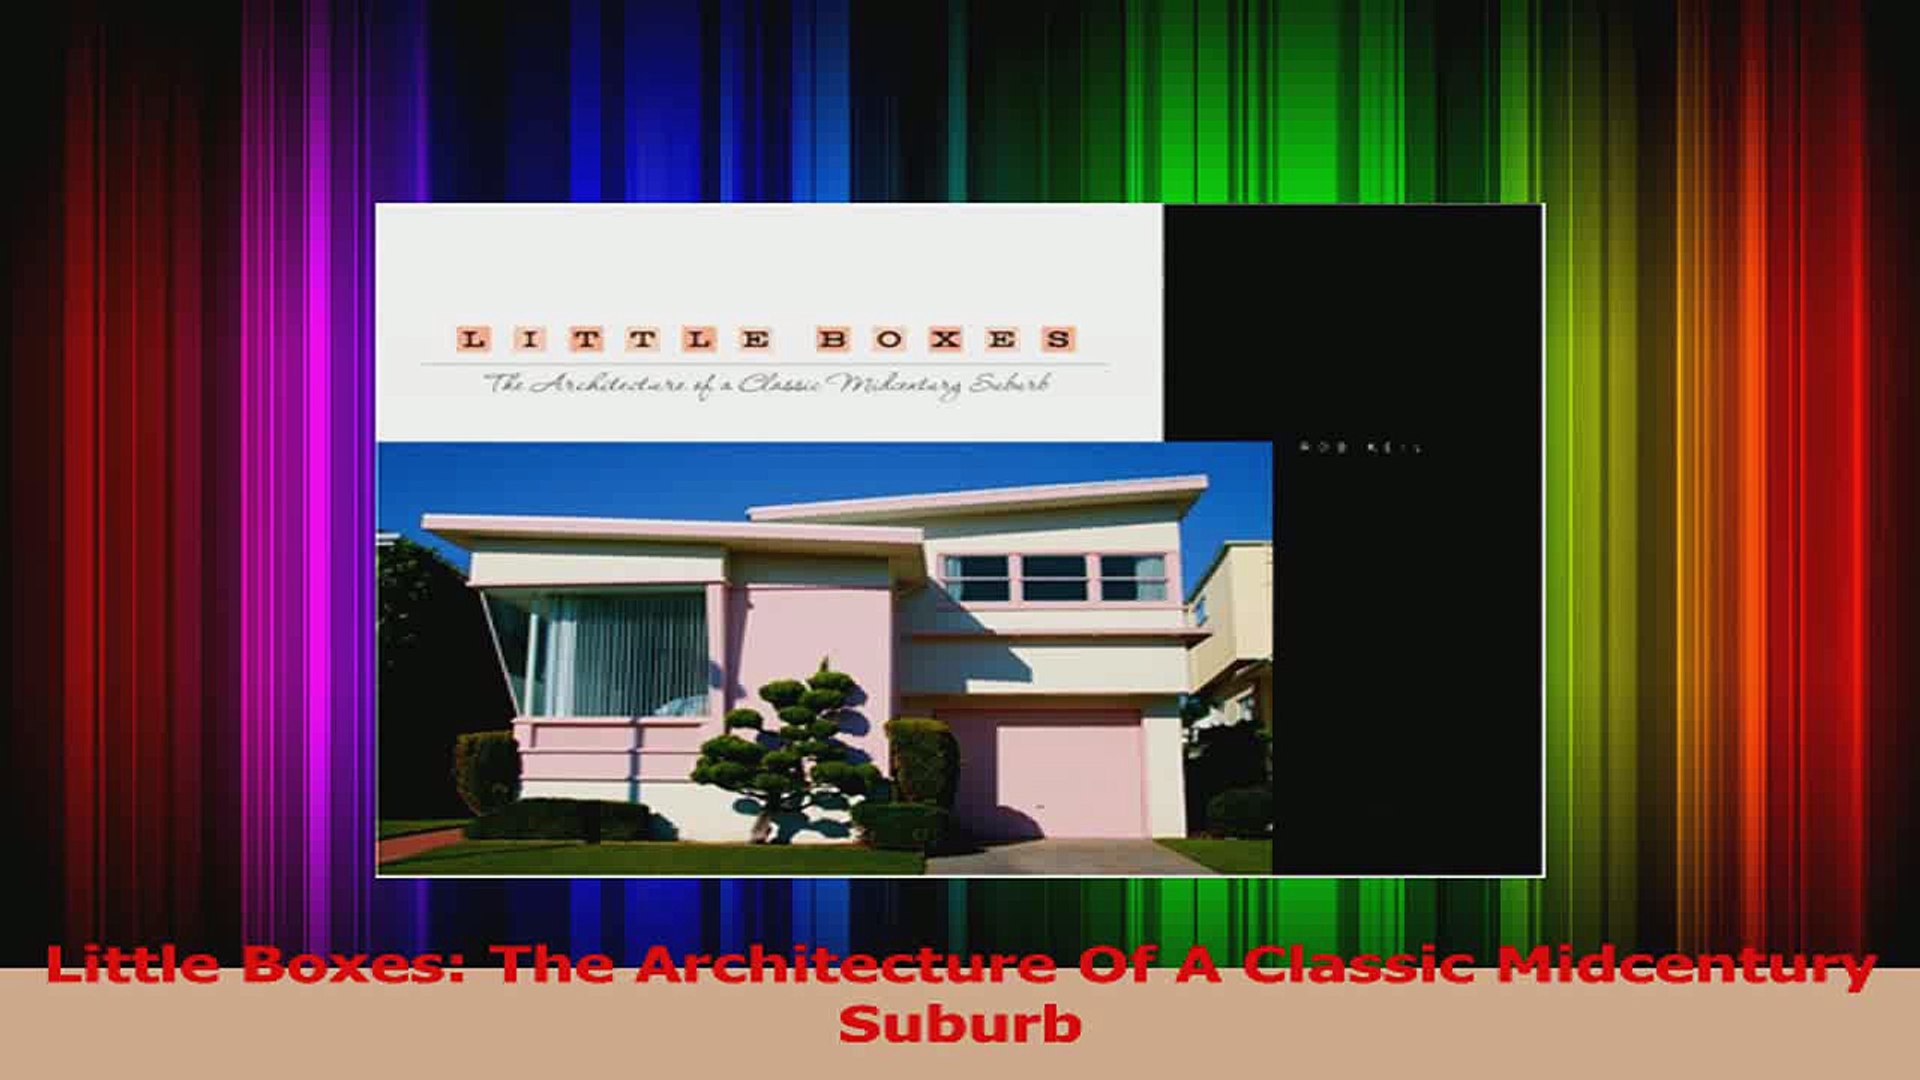 Pdf Download Little Boxes The Architecture Of A Classic Midcentury Suburb Pdf Full Ebook Video Dailymotion